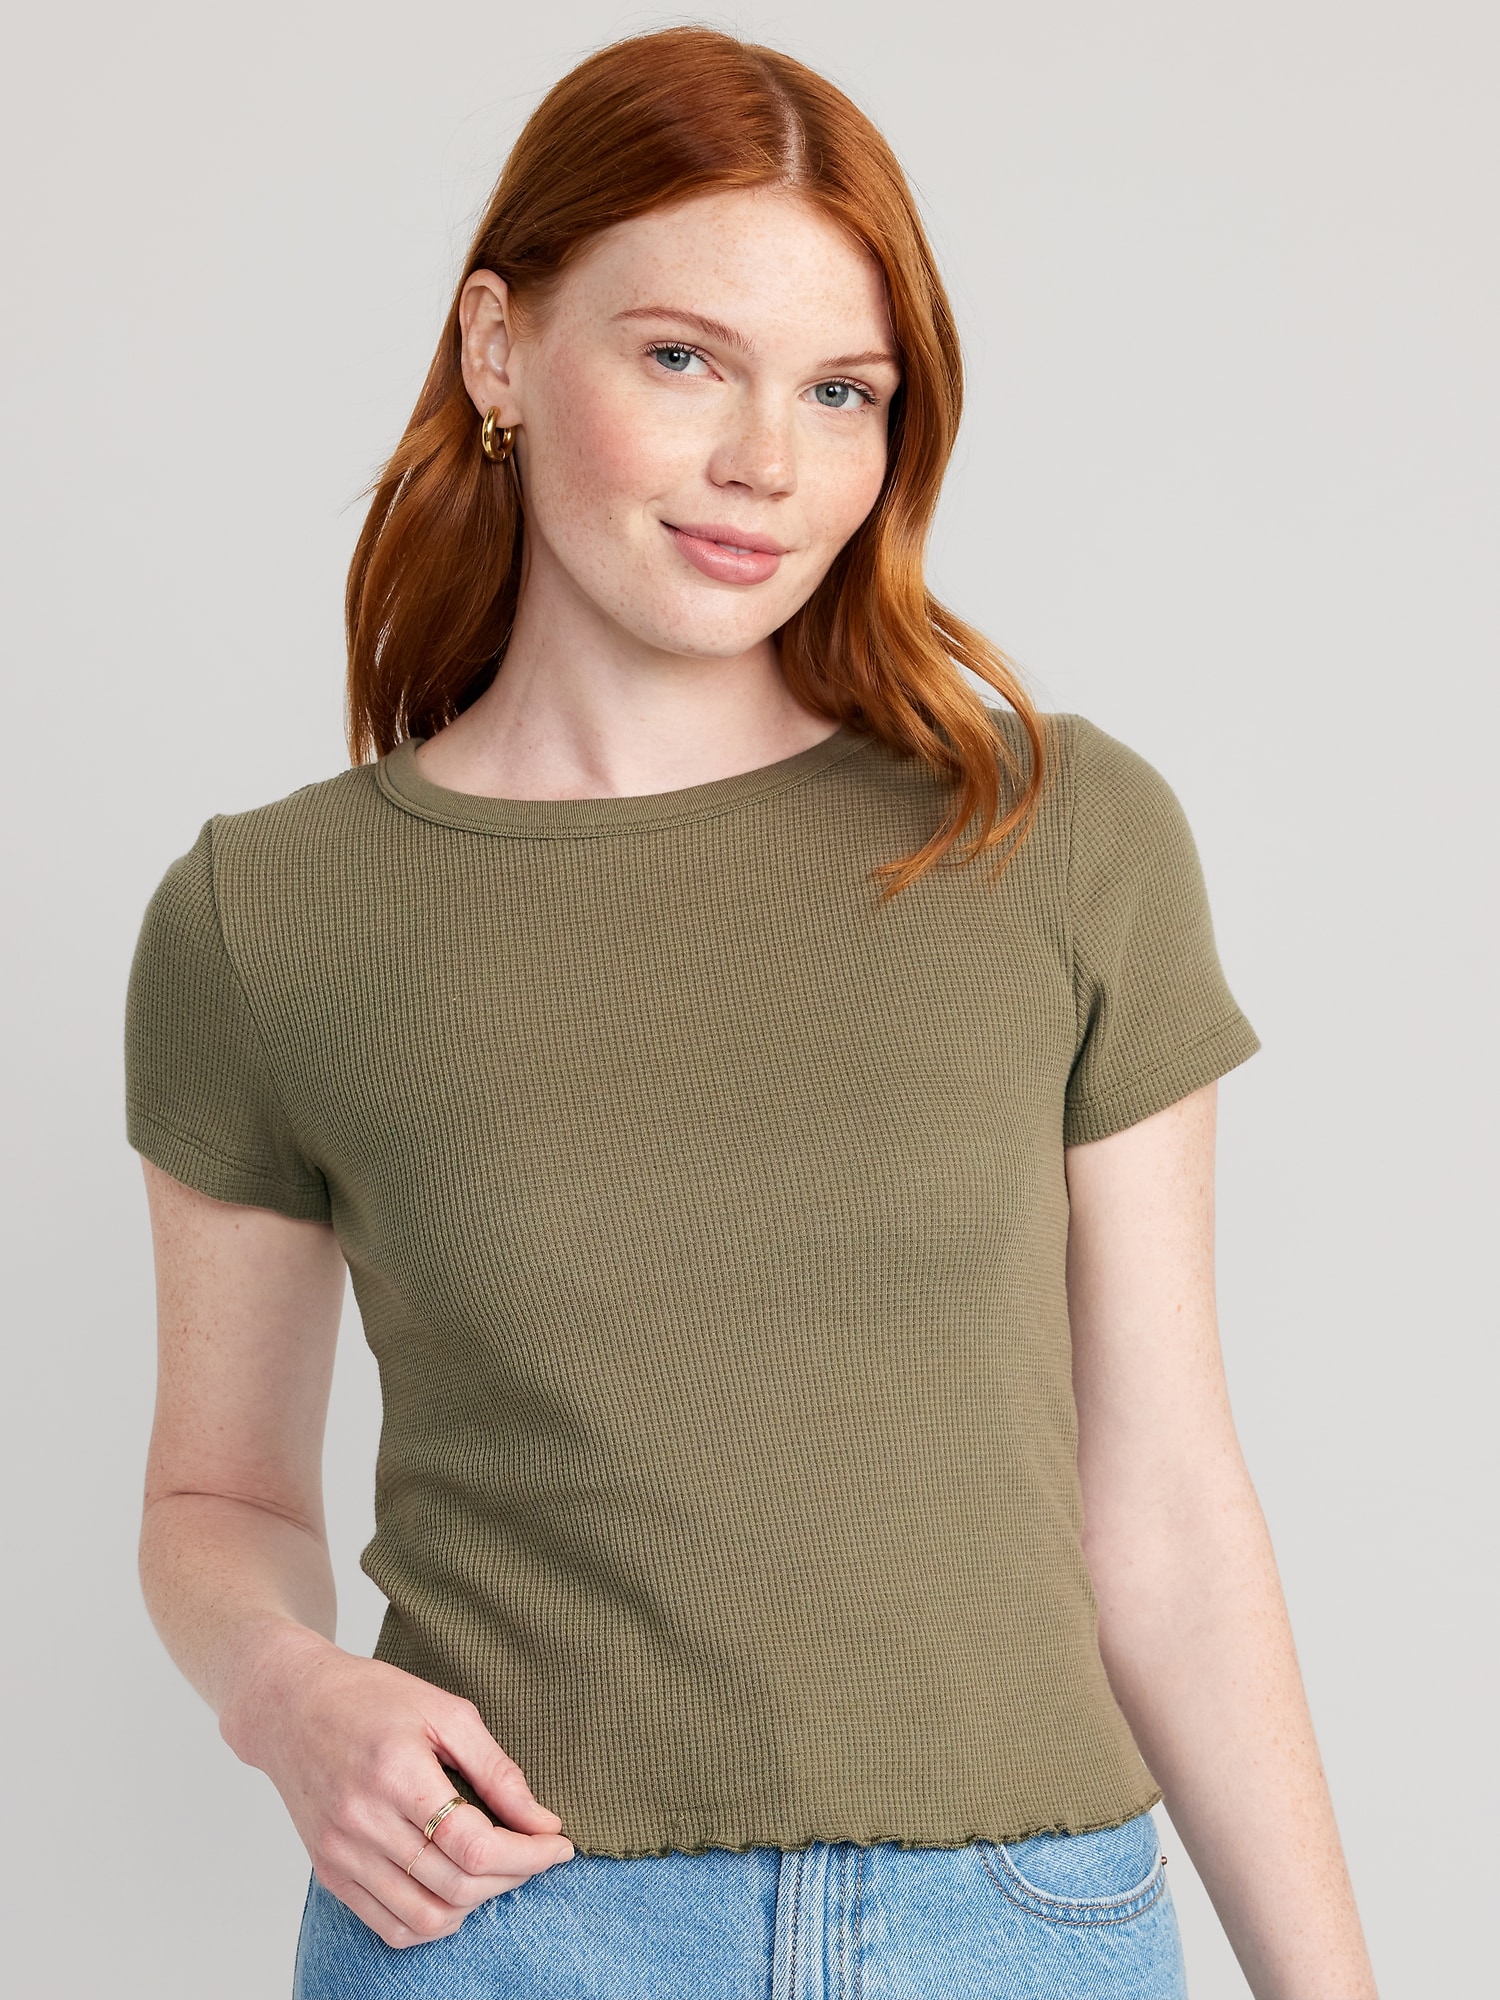 Lettuce-Edge Thermal-Knit Crop T-Shirt